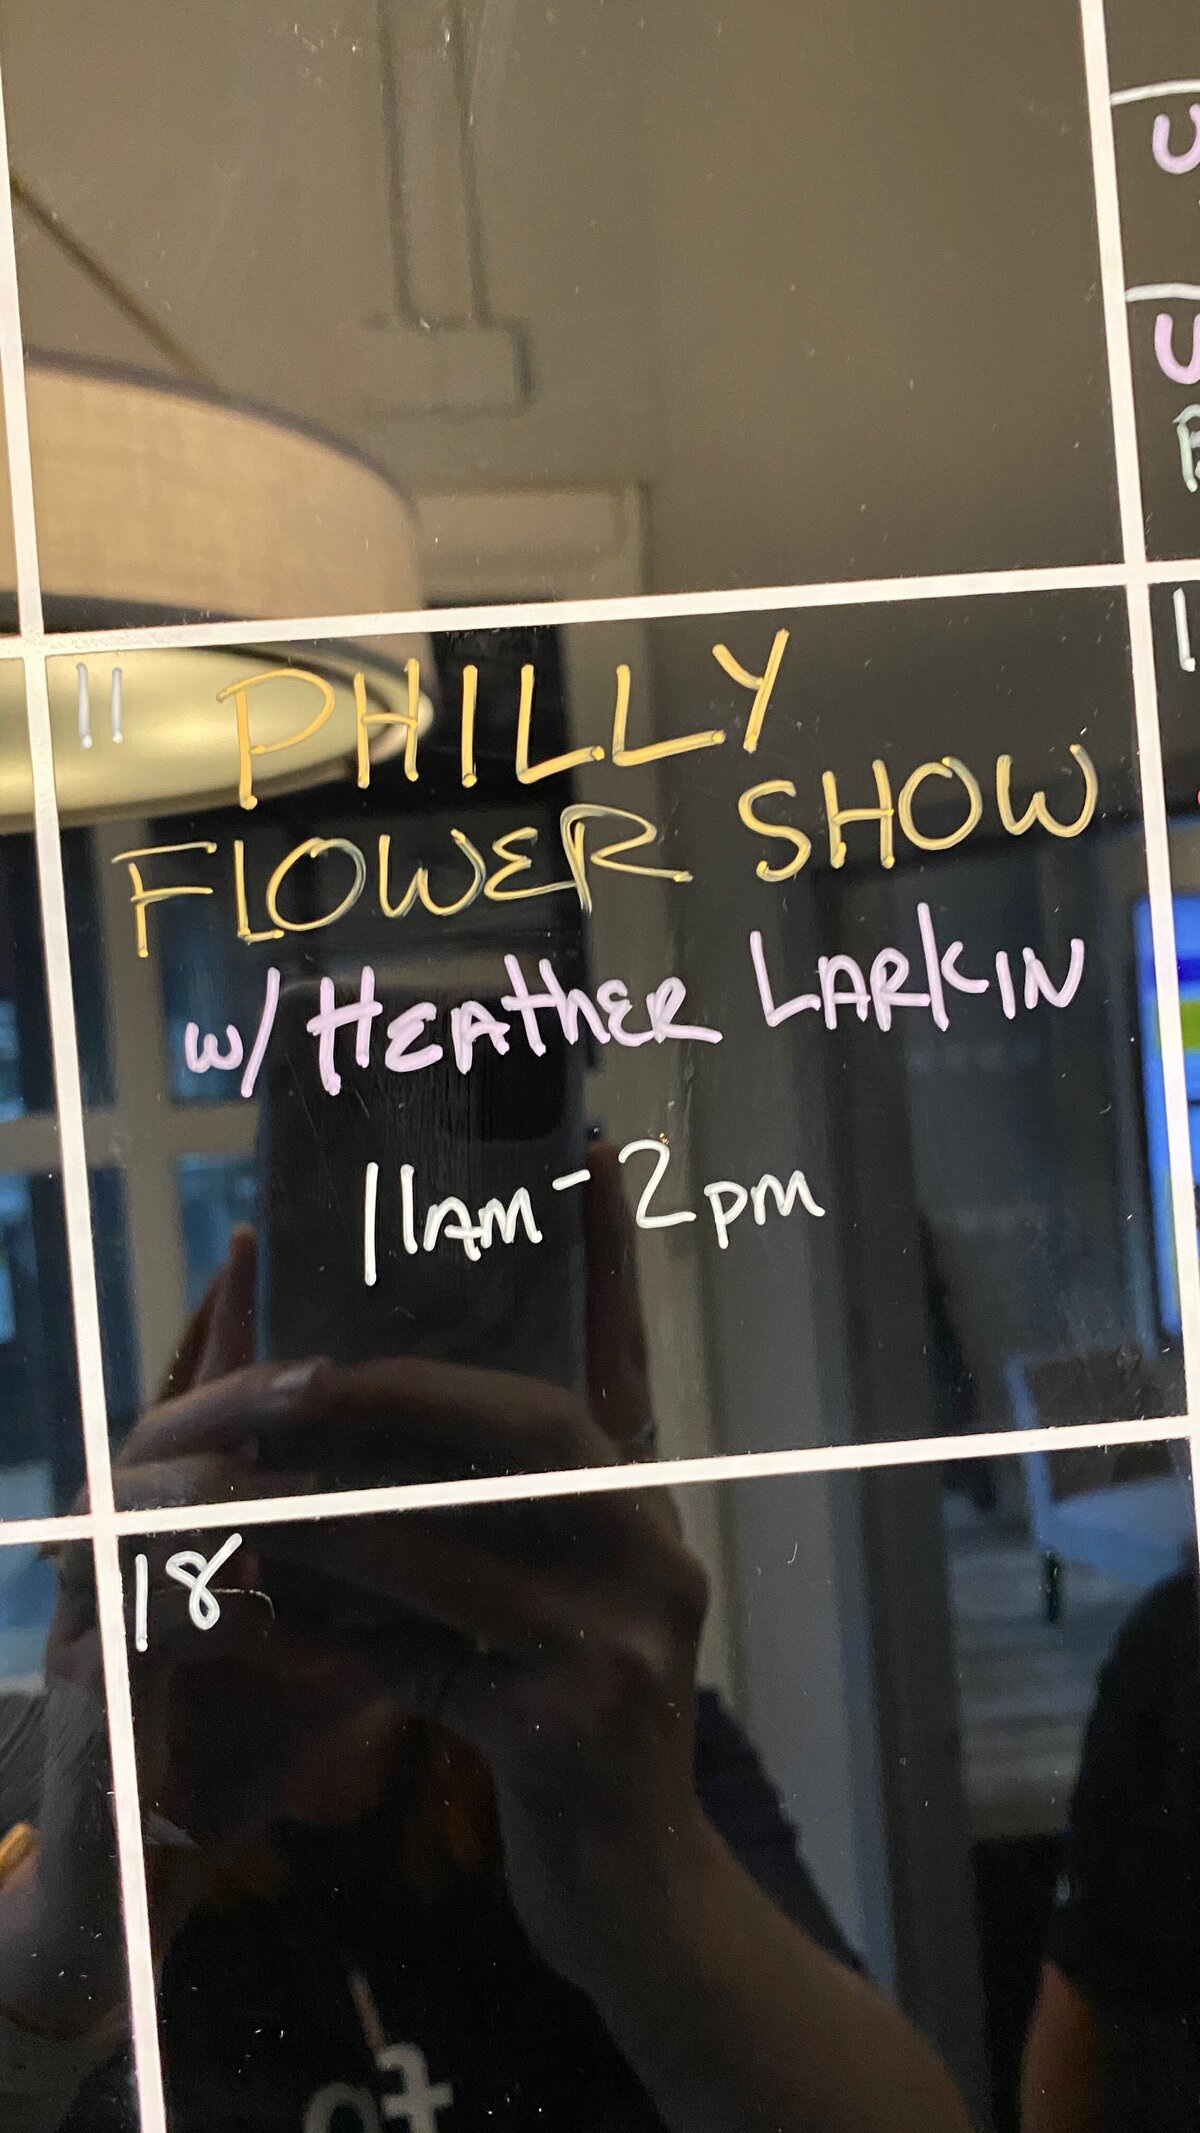 Heather Larkin at the Philly flower show